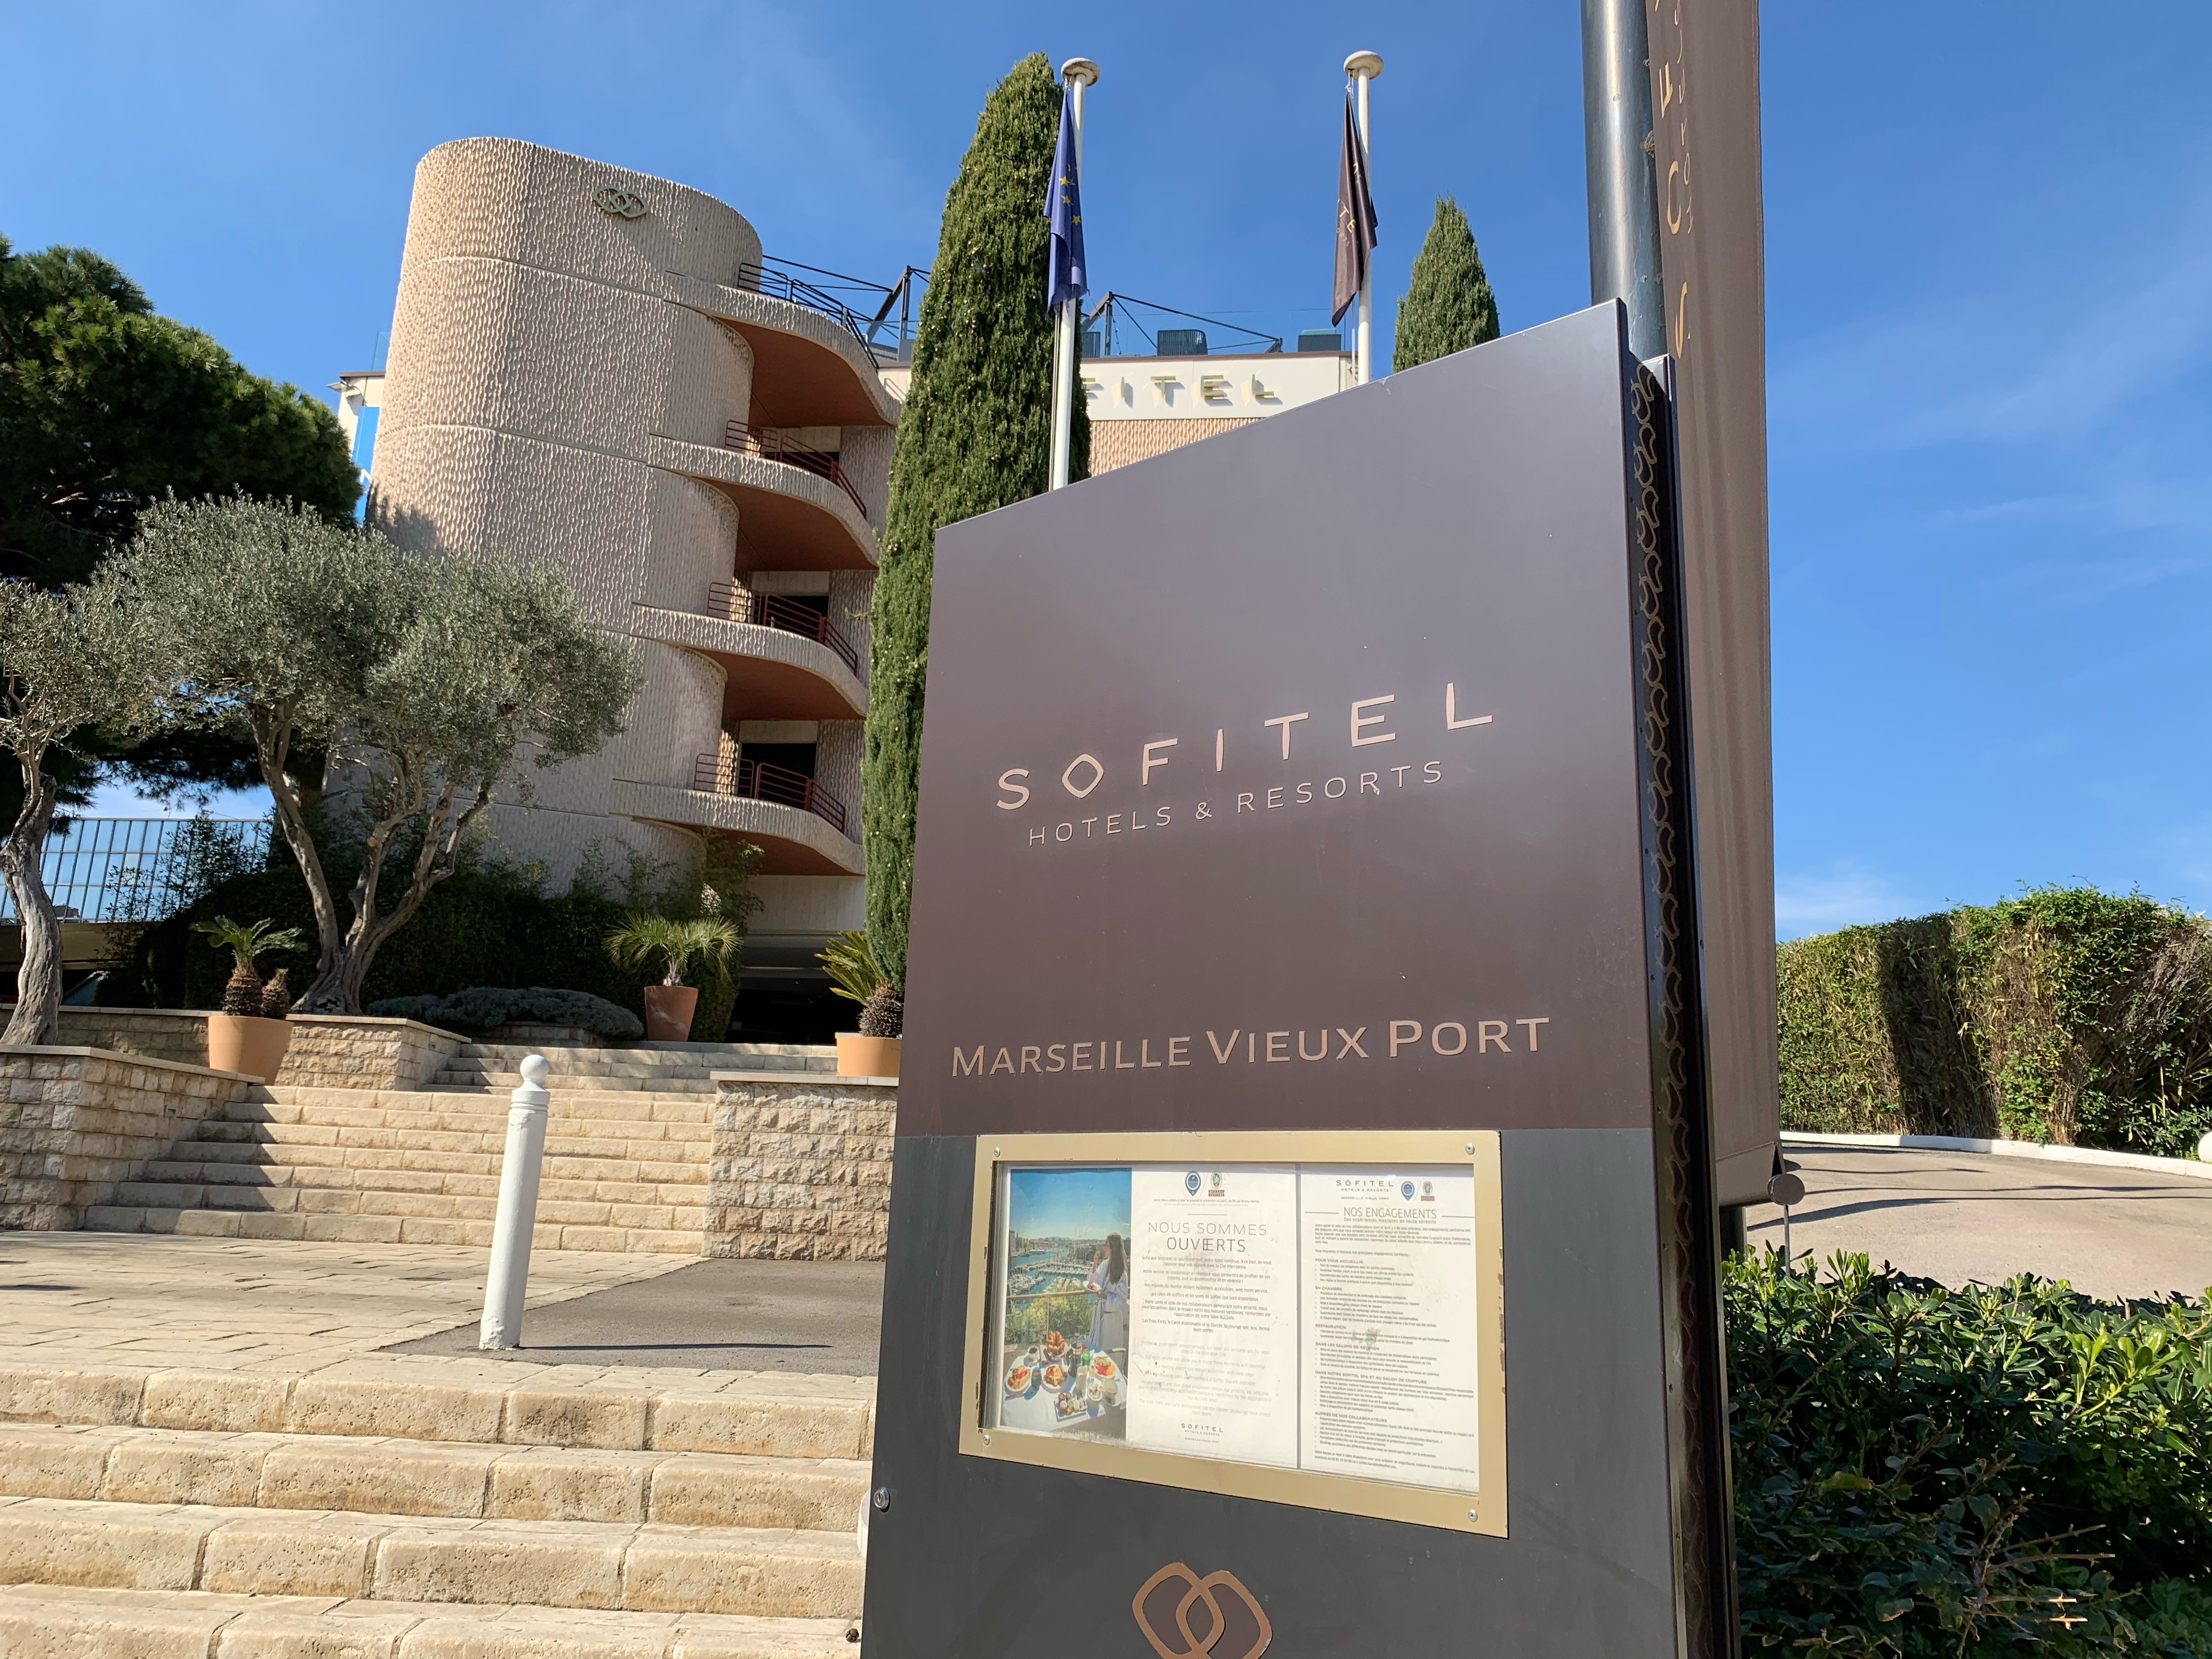 Sofitel Marseille Vieux Port : some potential but way too expensive for  what you get - FlyerTalk Forums